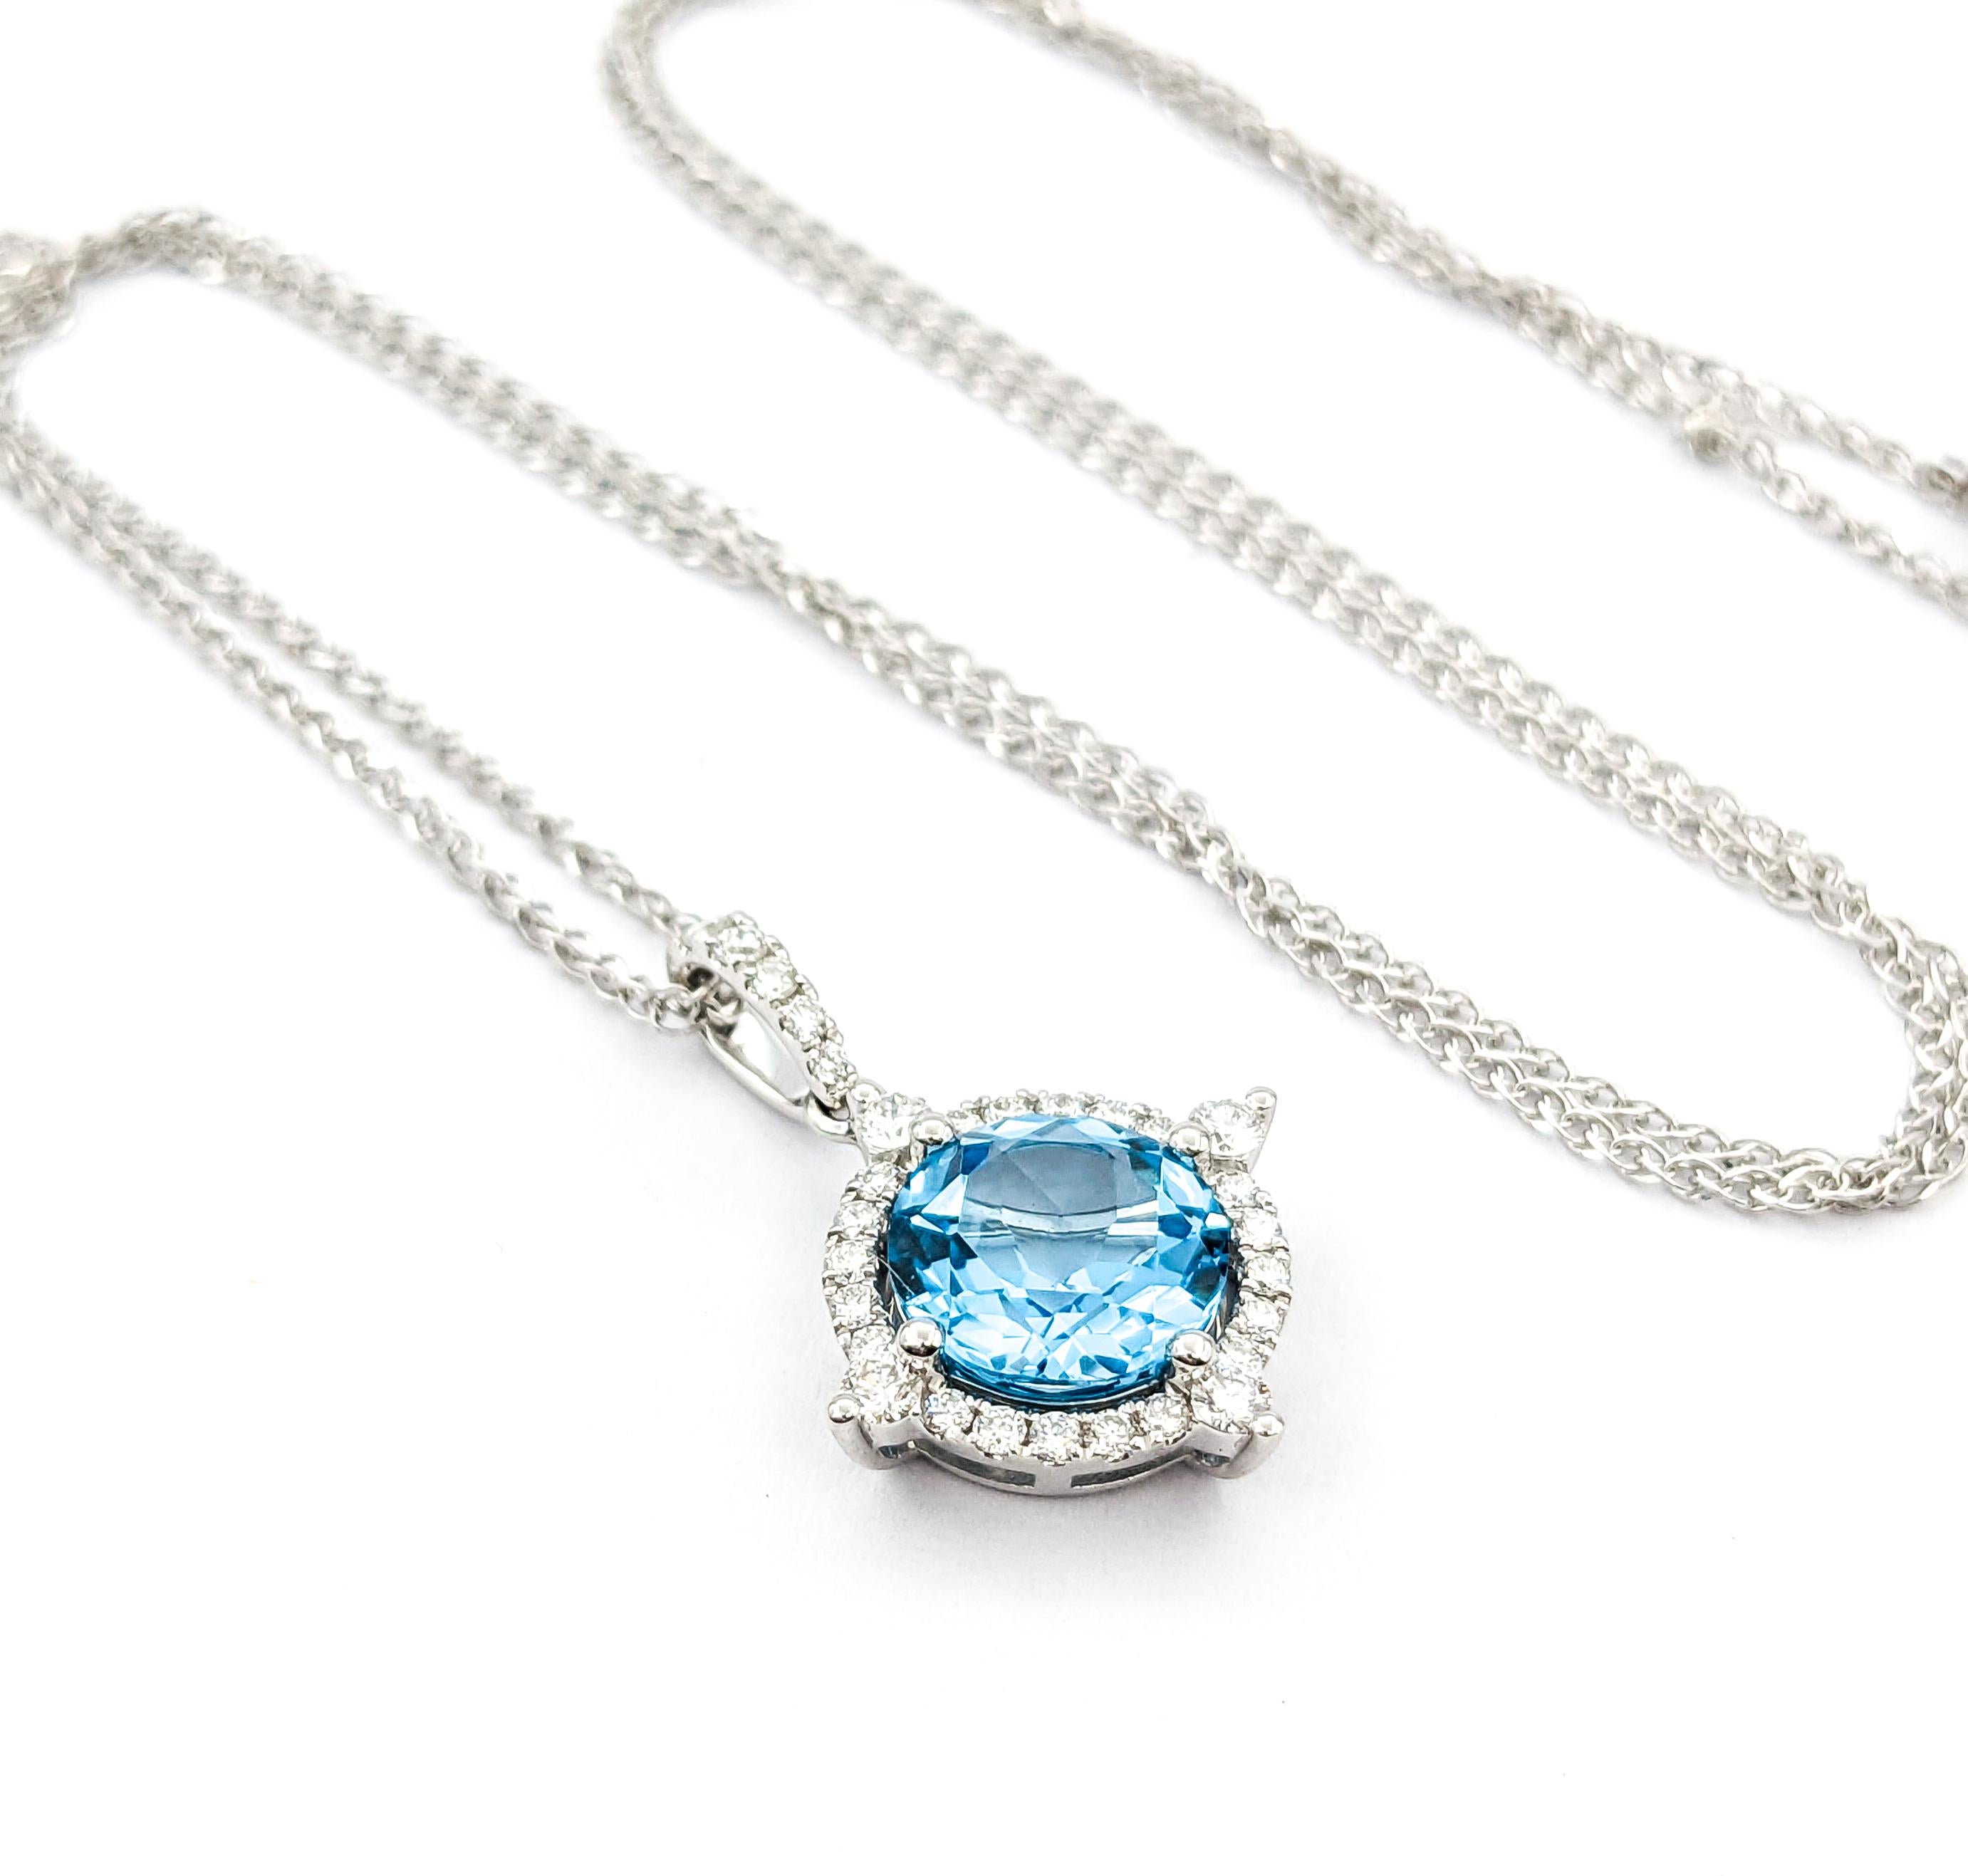 1.95ct Topaz & Diamond Pendant In White Gold W/Chain

Introducing this exquisite gemstone fashion pendant crafted in 14kt white gold. This elegant drop pendant features .29ctw of diamonds and a 1.95ct topaz. The diamonds, known for their SI clarity